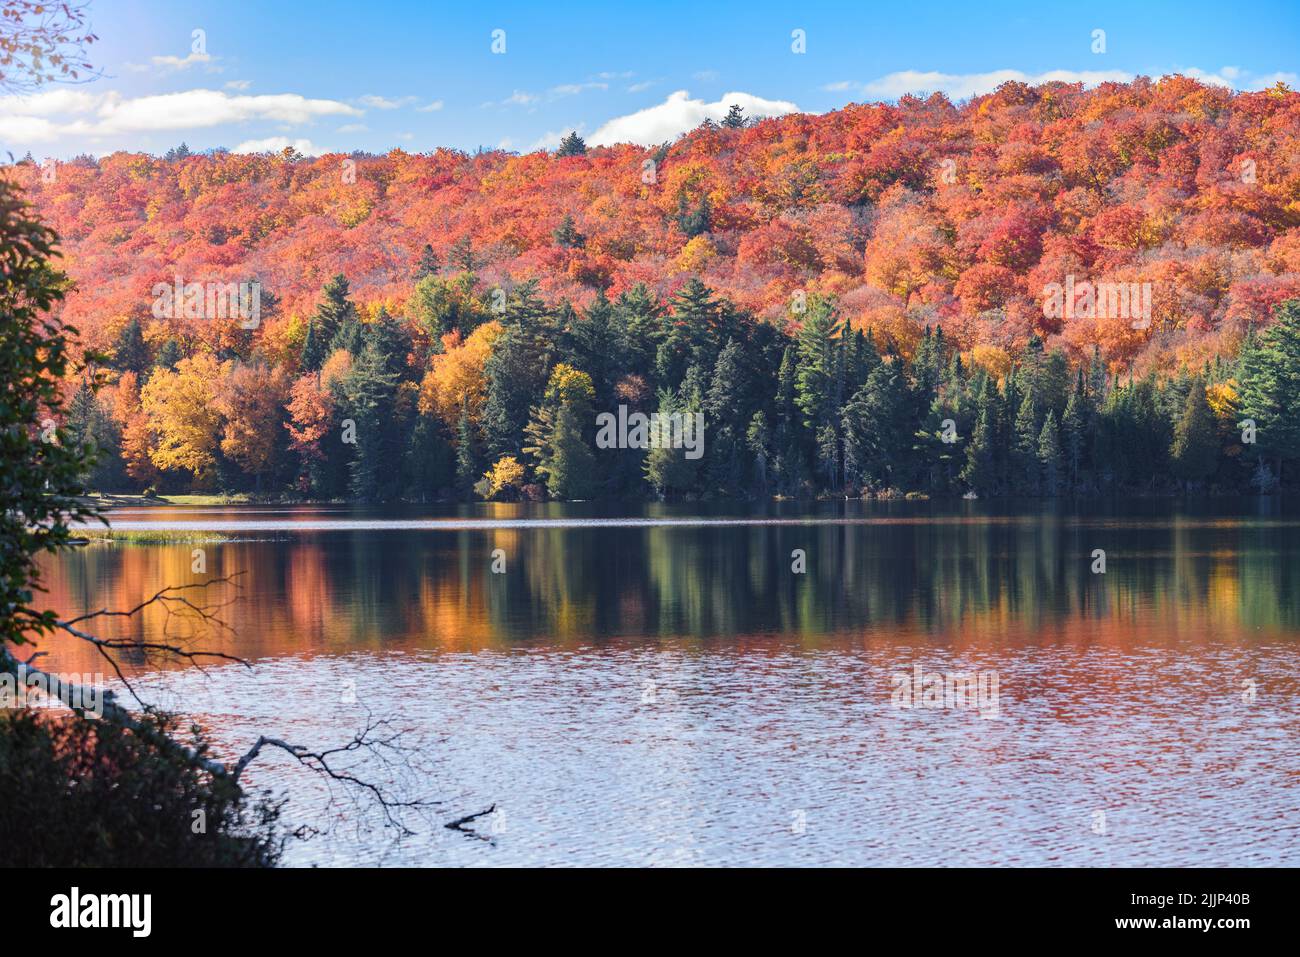 Desense forest at the peak of fall foliage reflecting in calm waters of a lake on a sunny day Stock Photo